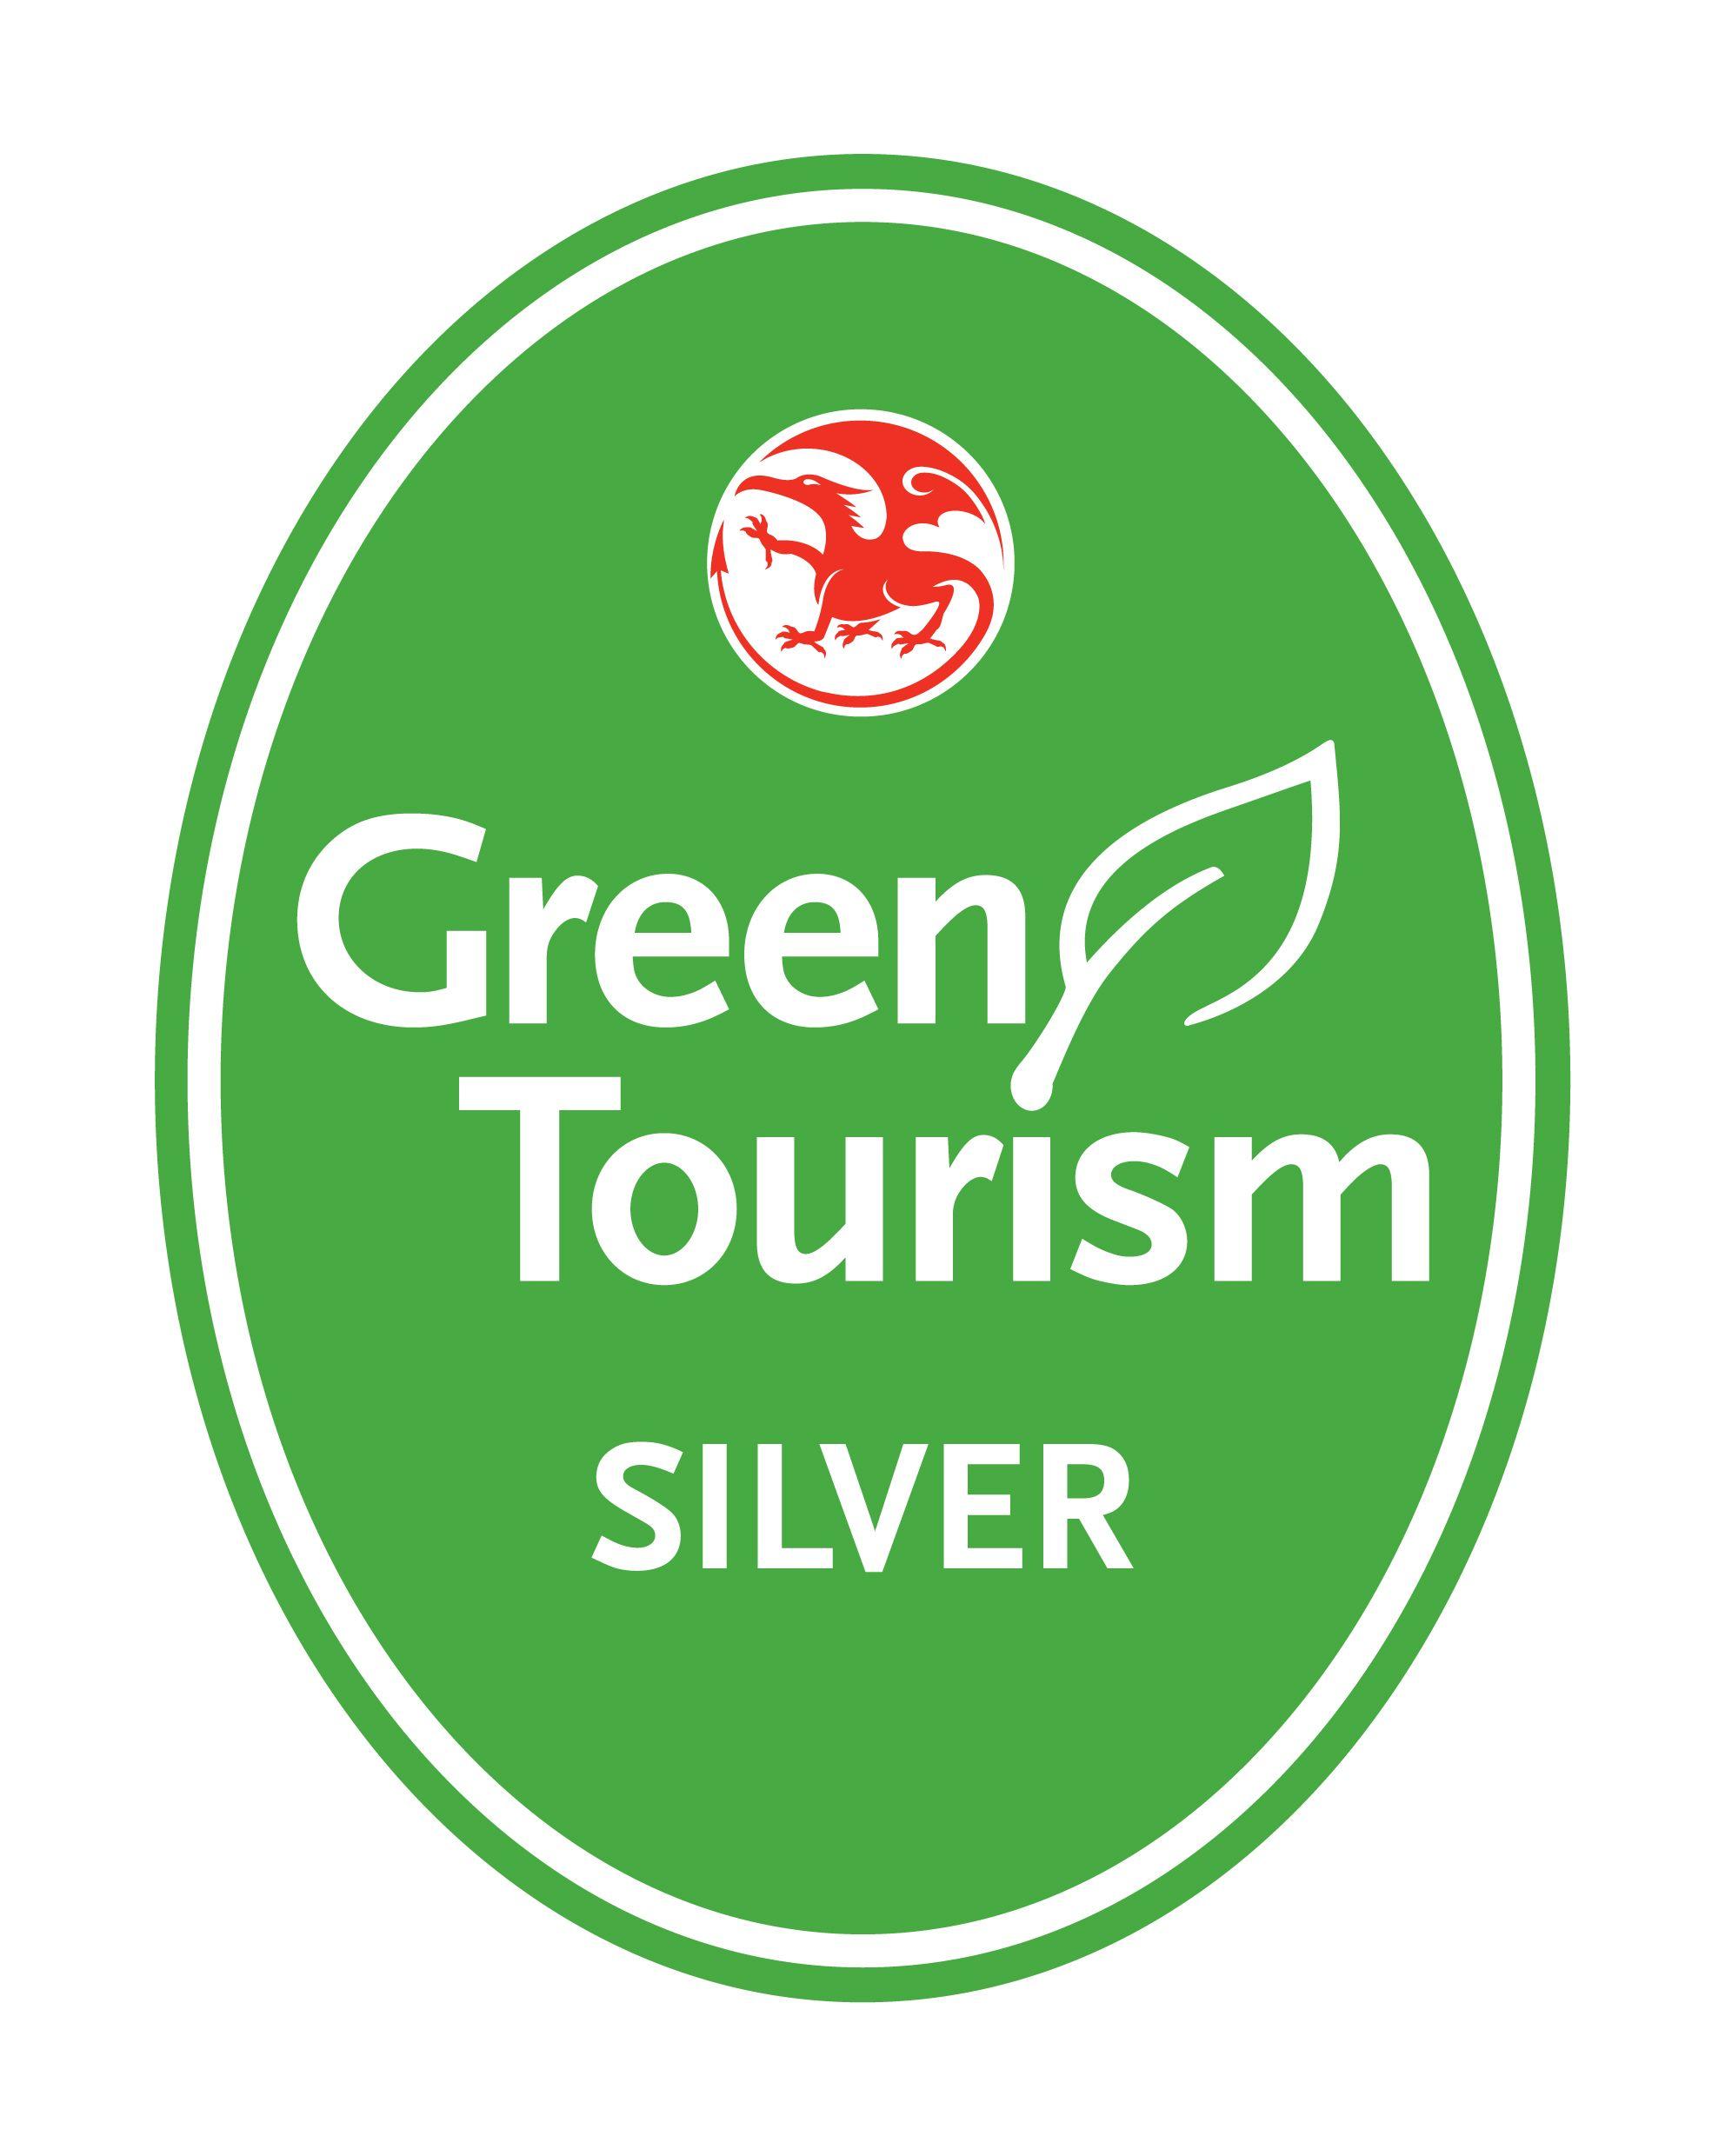 Green Circle with Silver Ball Logo - GTBS Wales Silver Farmhouse Bed & Breakfast, Campsite